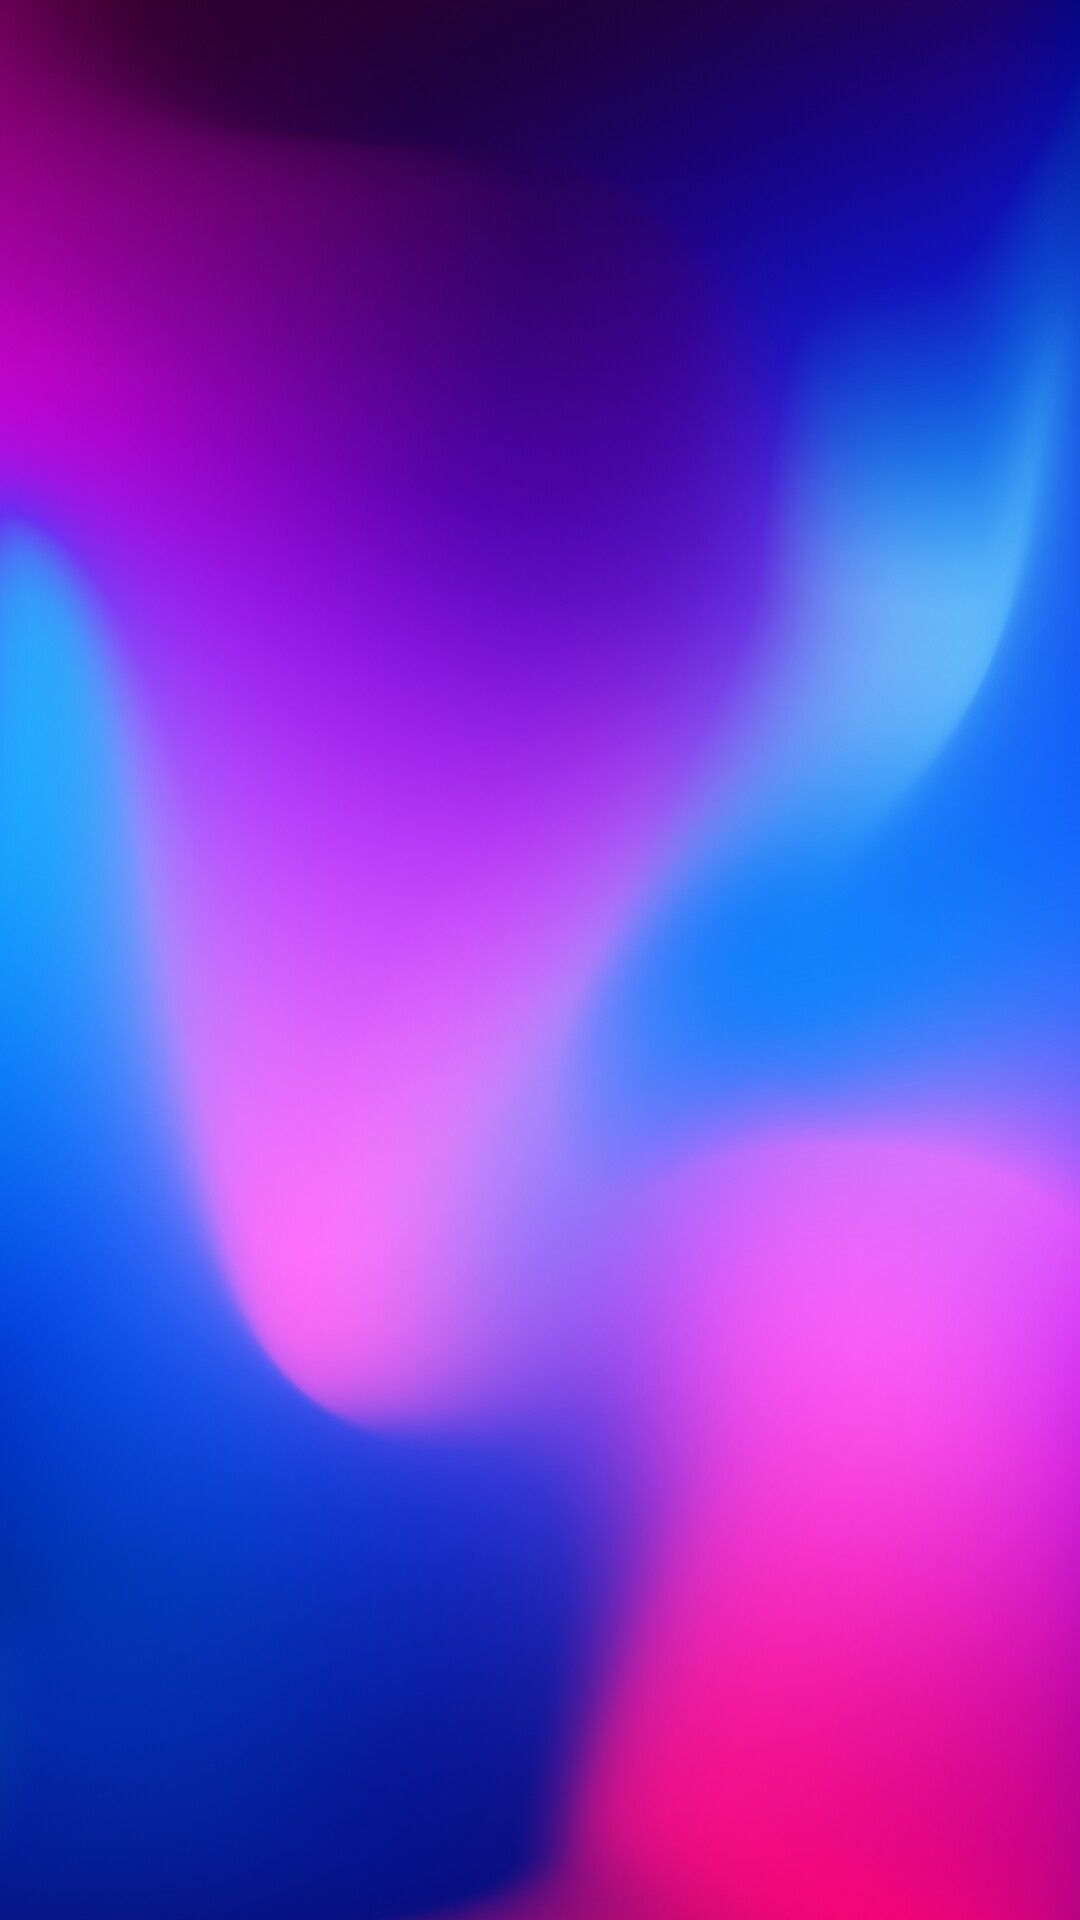 Abstract °Amoled °Liquid °Gradient. Android